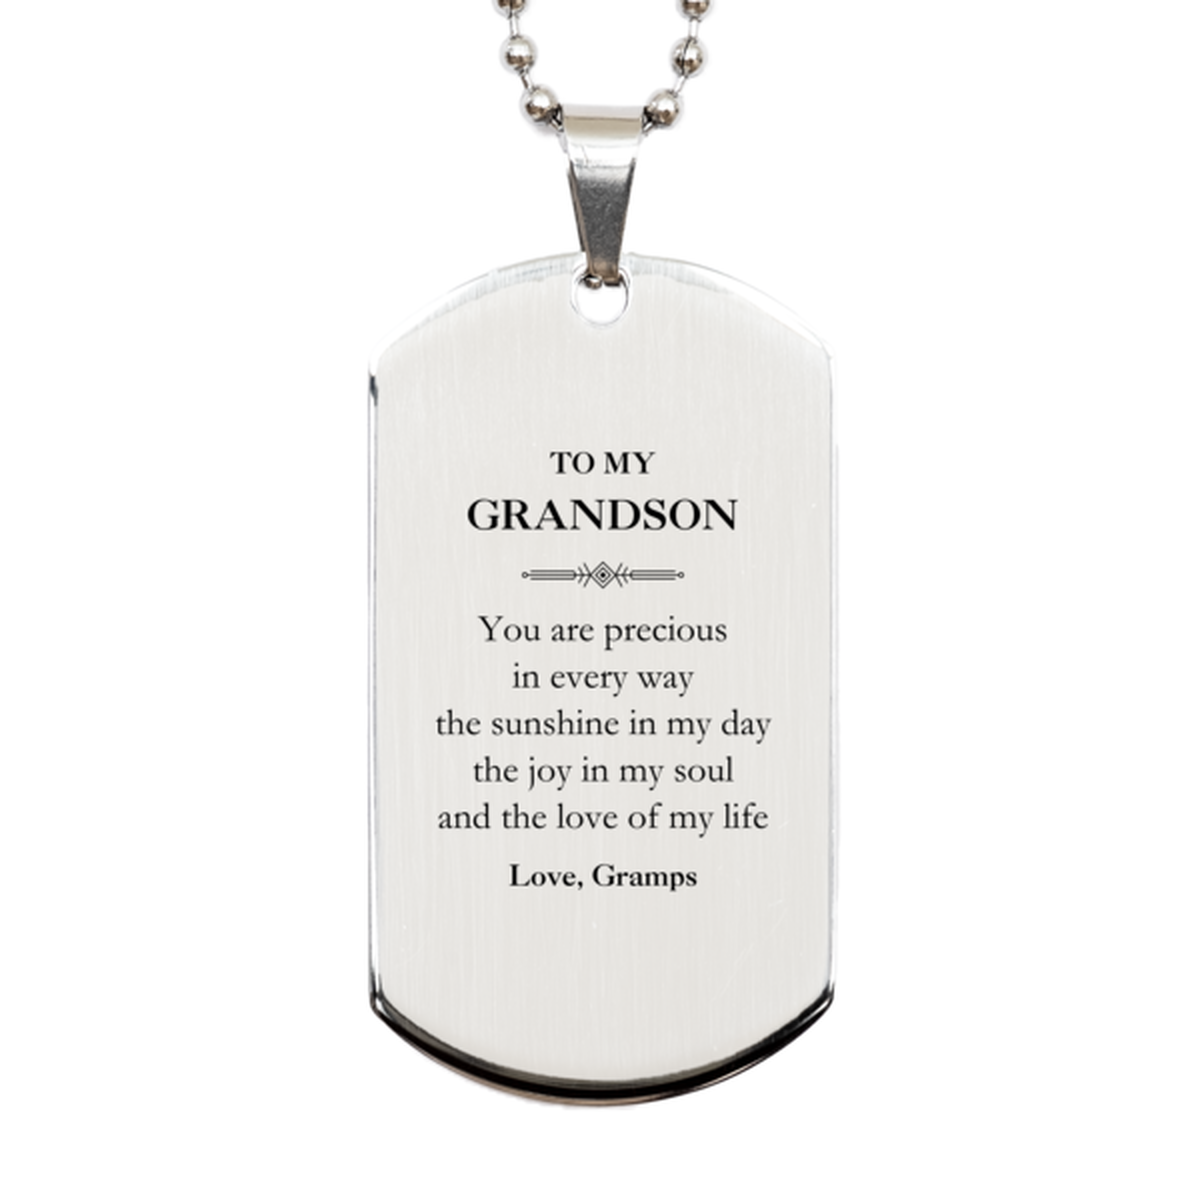 Graduation Gifts for Grandson Silver Dog Tag Present from Gramps, Christmas Grandson Birthday Gifts Grandson You are precious in every way the sunshine in my day. Love, Gramps